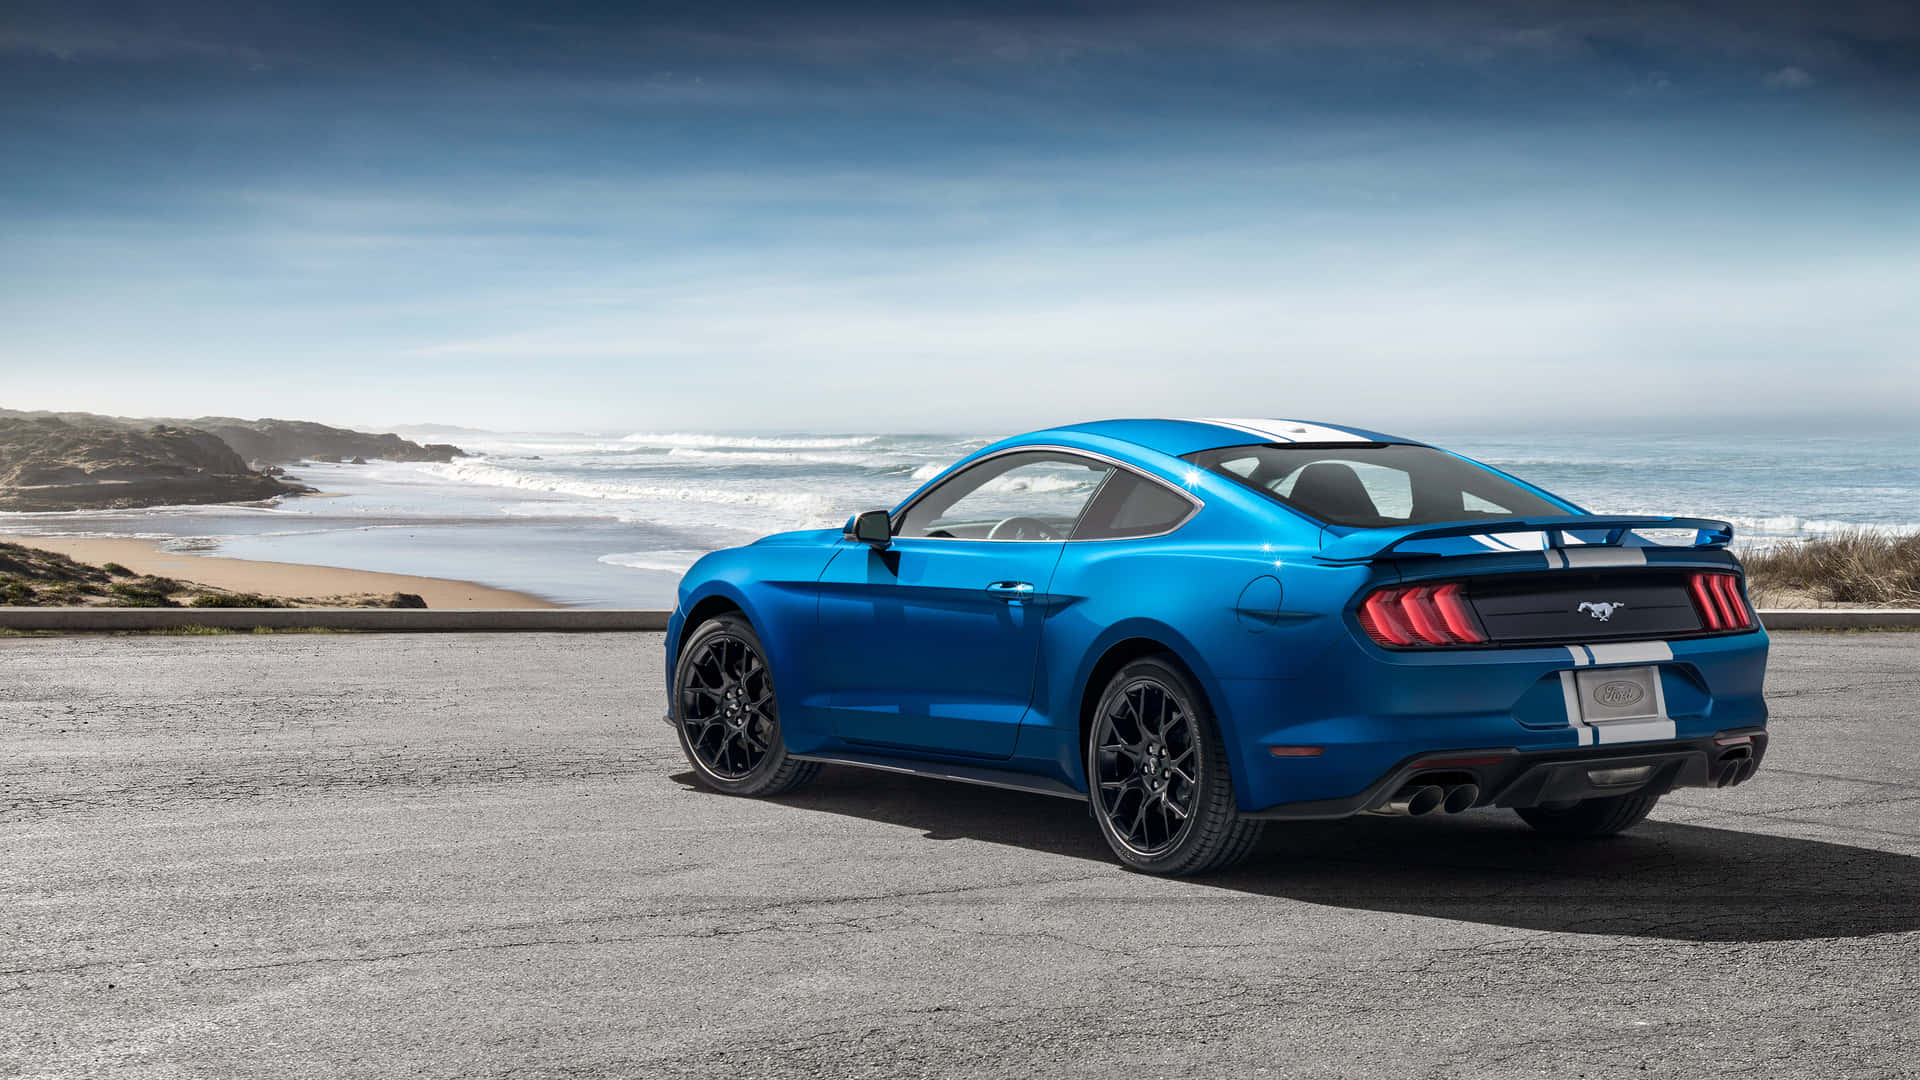 Stunning Ford Mustang Ecoboost on the Open Road Wallpaper